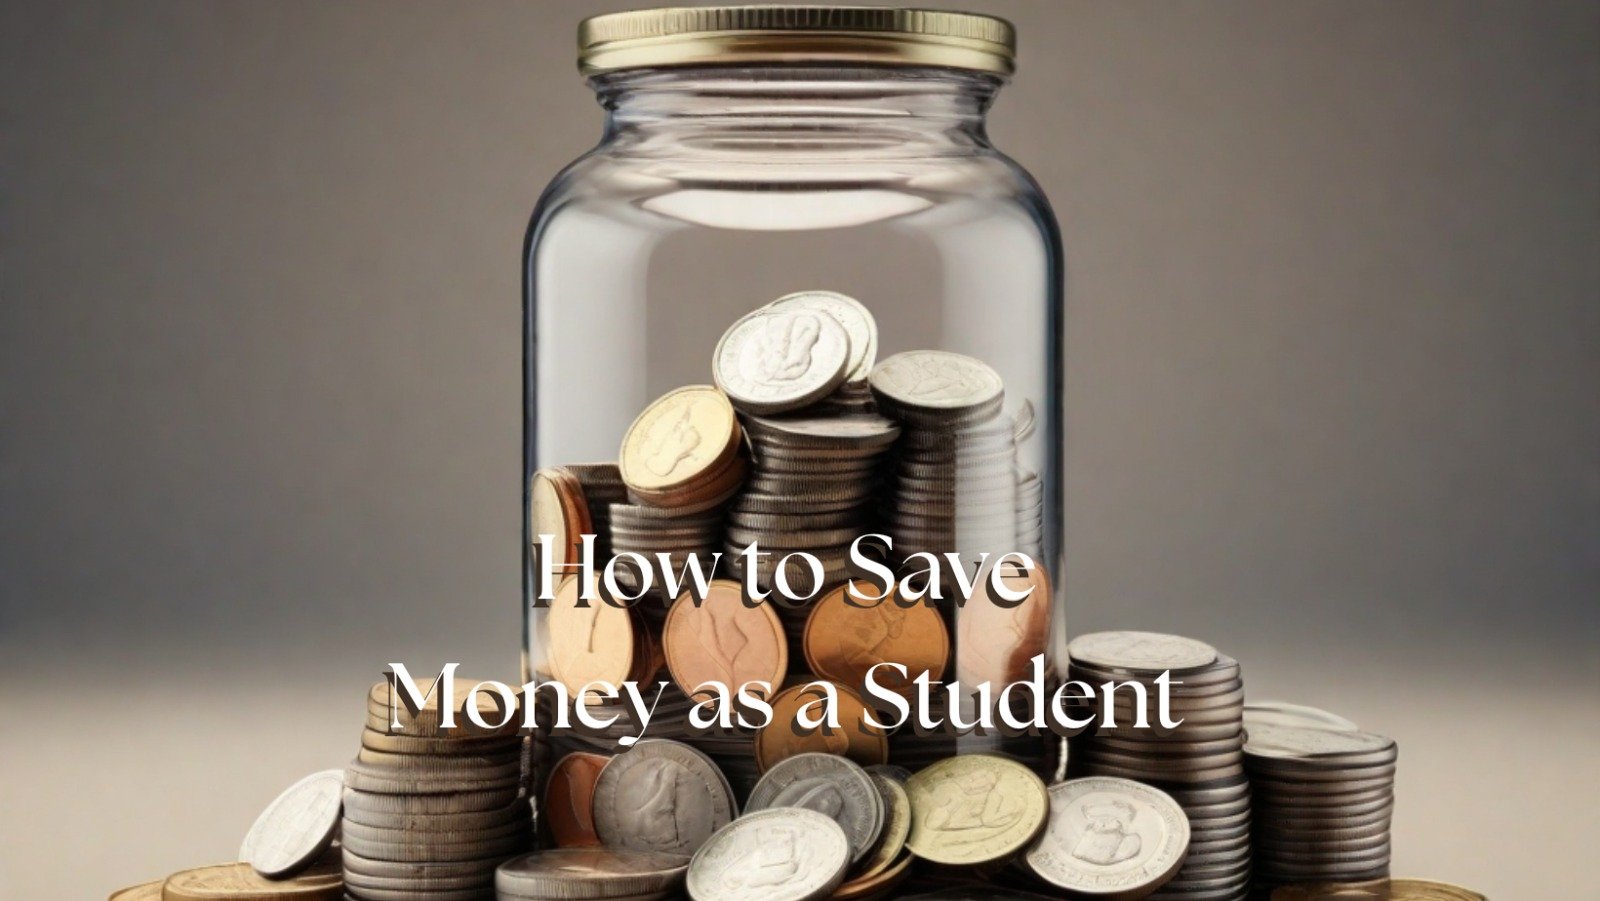 How to Save Money as a Student #Best Money Saving Tricks